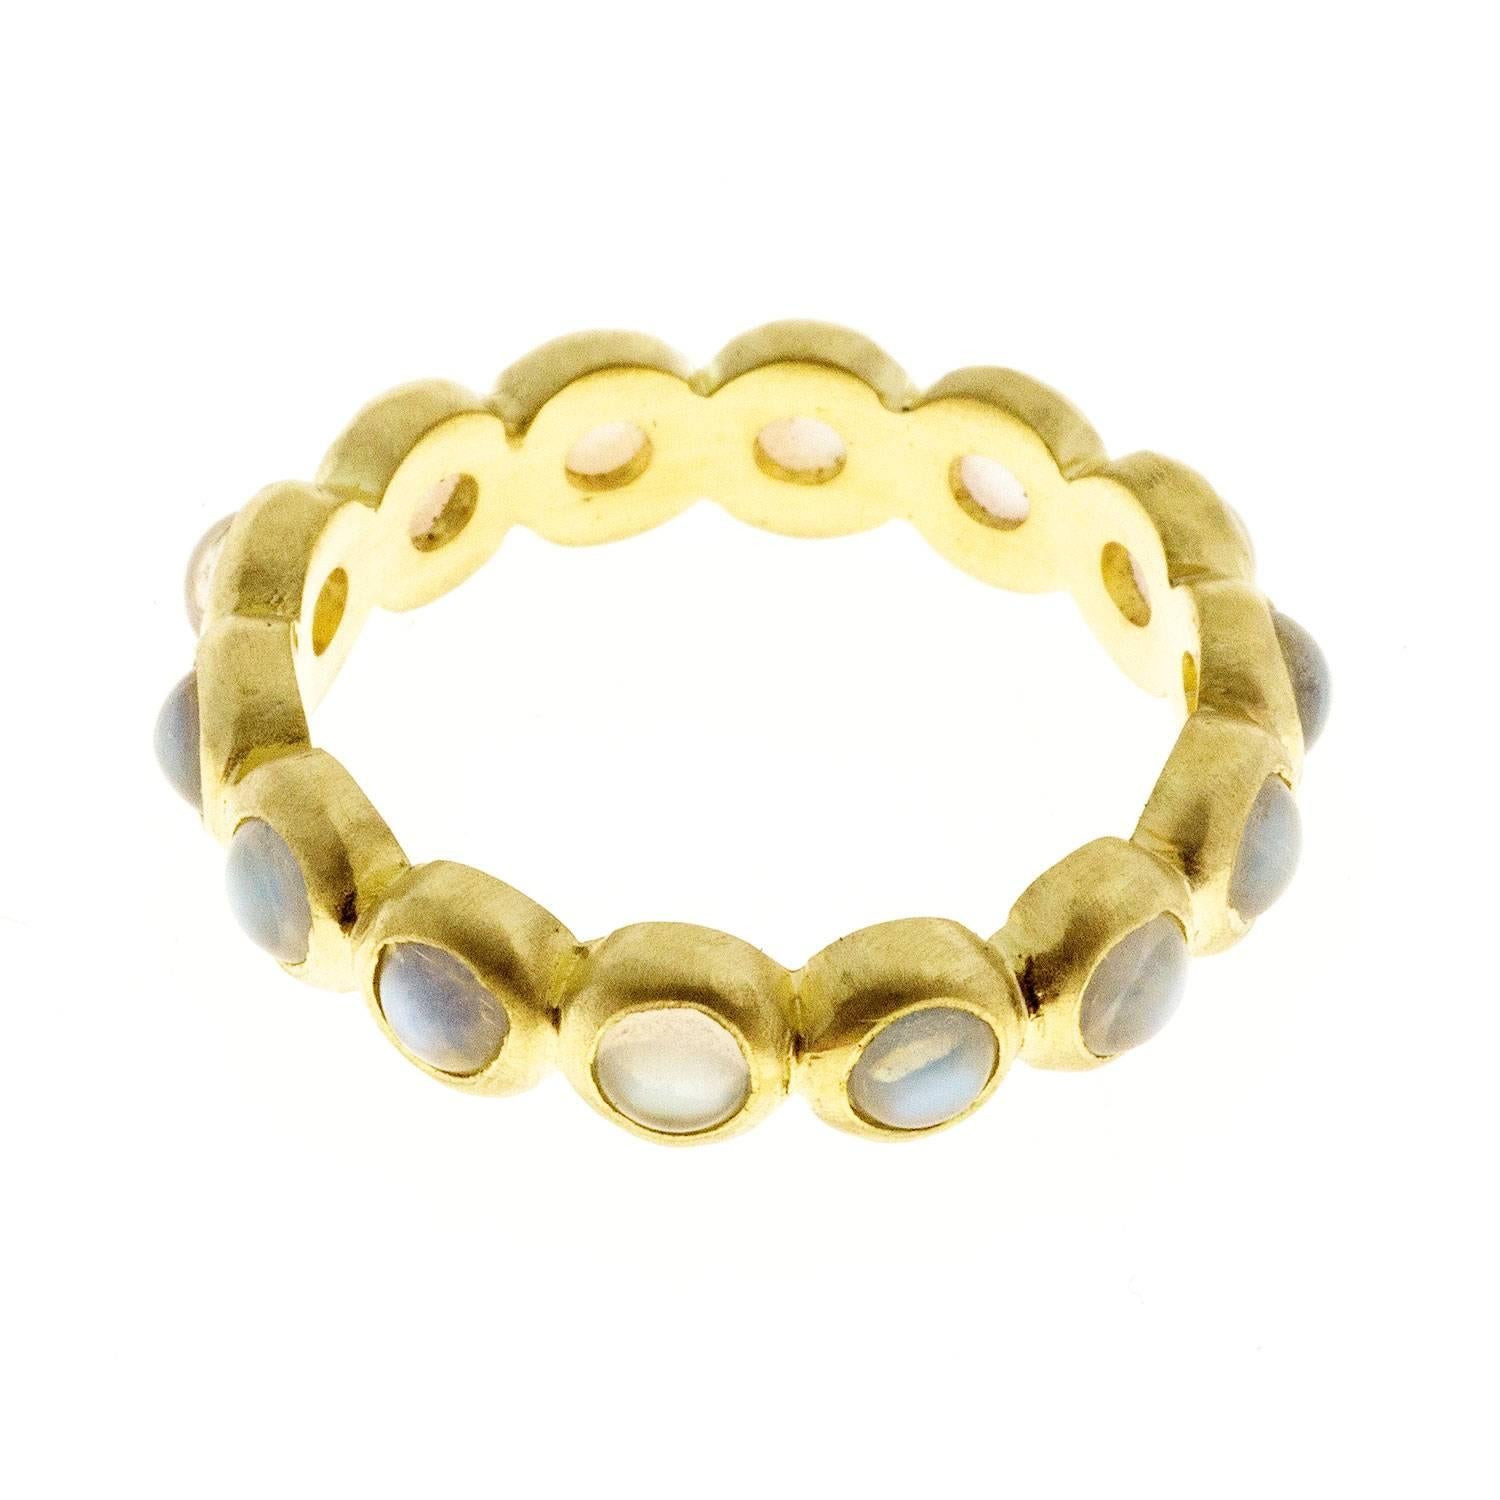 18k green* gold baby Burma moonstone cabochon eternity band ring.

3/16 inches wide    Size 7.5

Other sizes available by special order.  

*Faye Kim offers design options in all precious metals and finishes including yellow, white, and rose gold